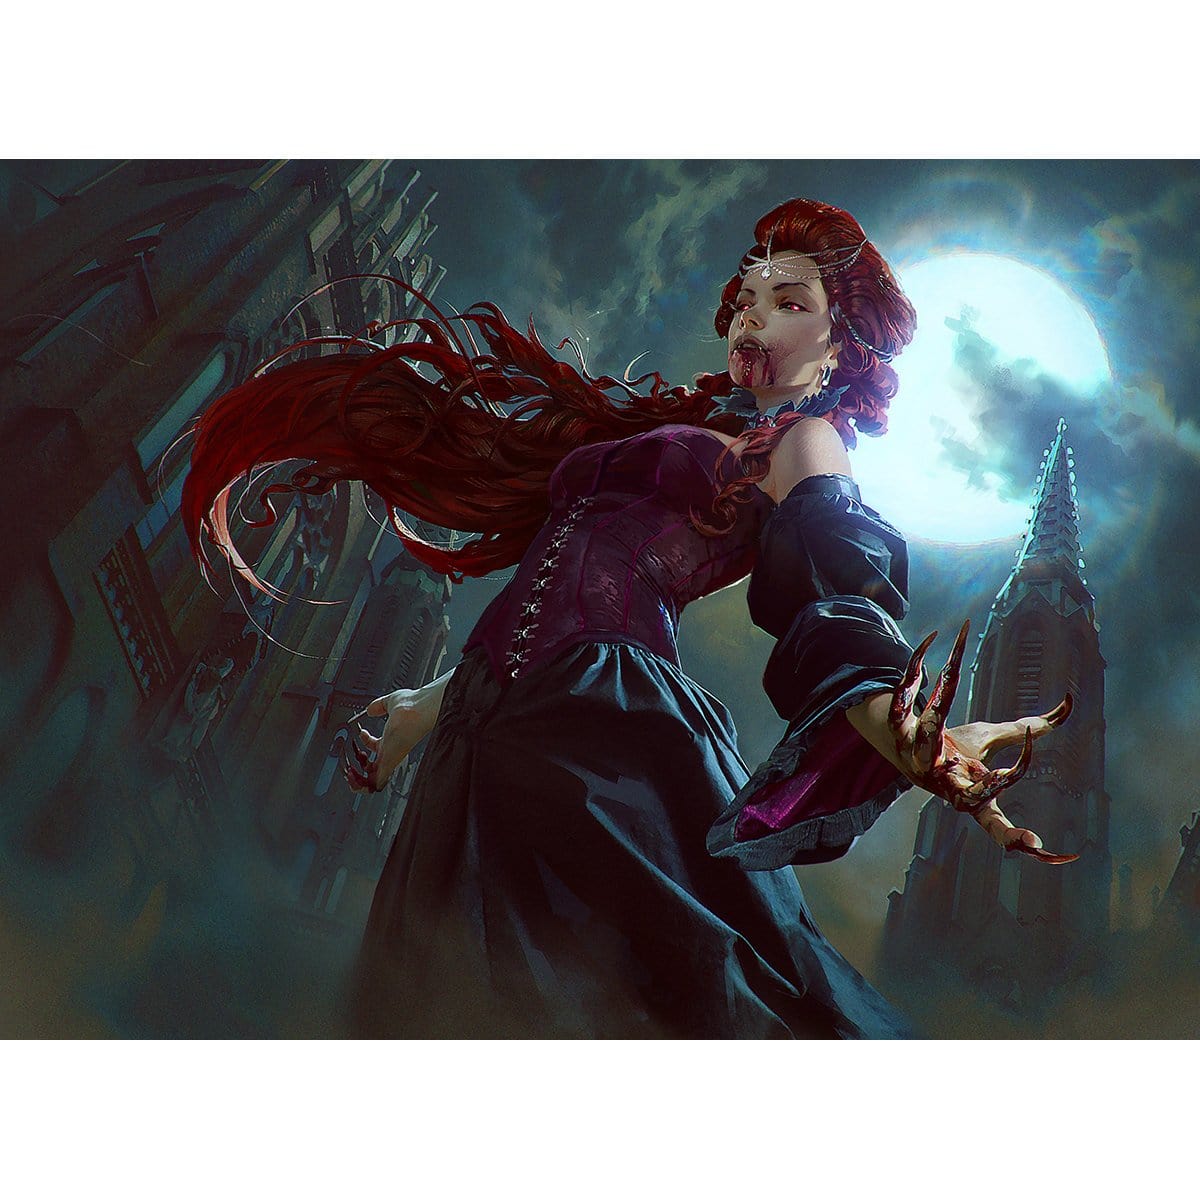 Vampire of the Dire Moon Print - Print - Original Magic Art - Accessories for Magic the Gathering and other card games